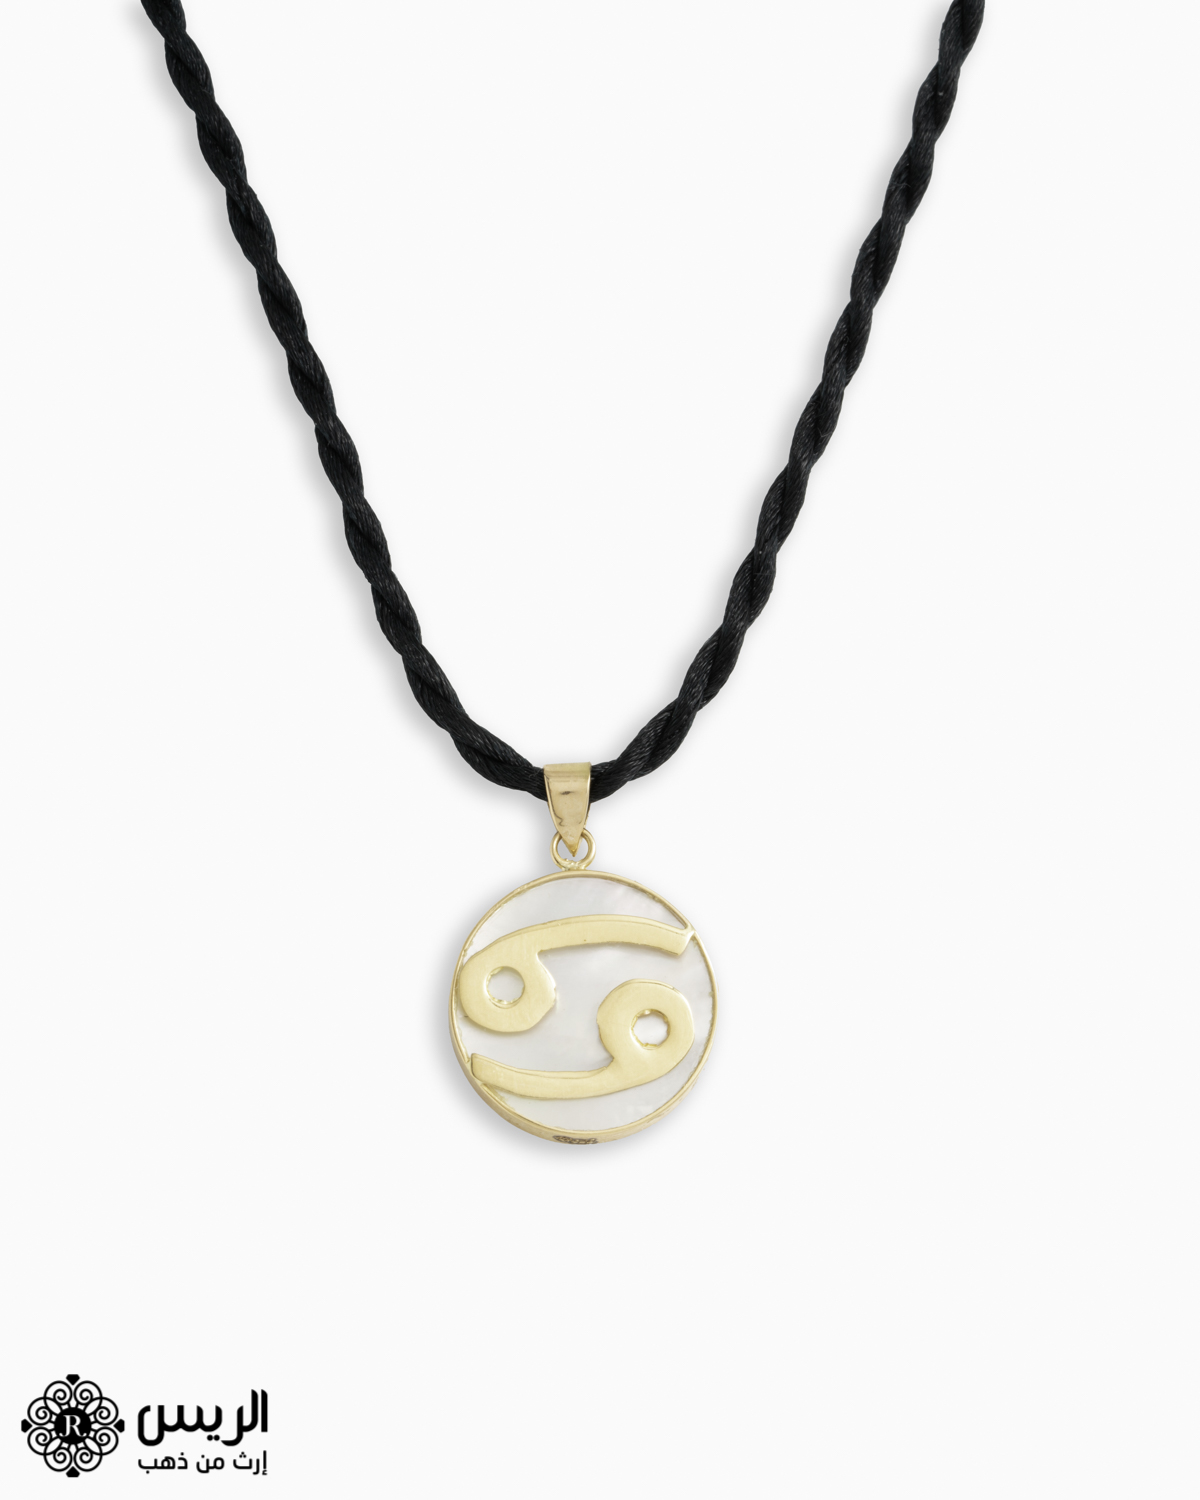 Shell Necklace Cancer Zodiac sign